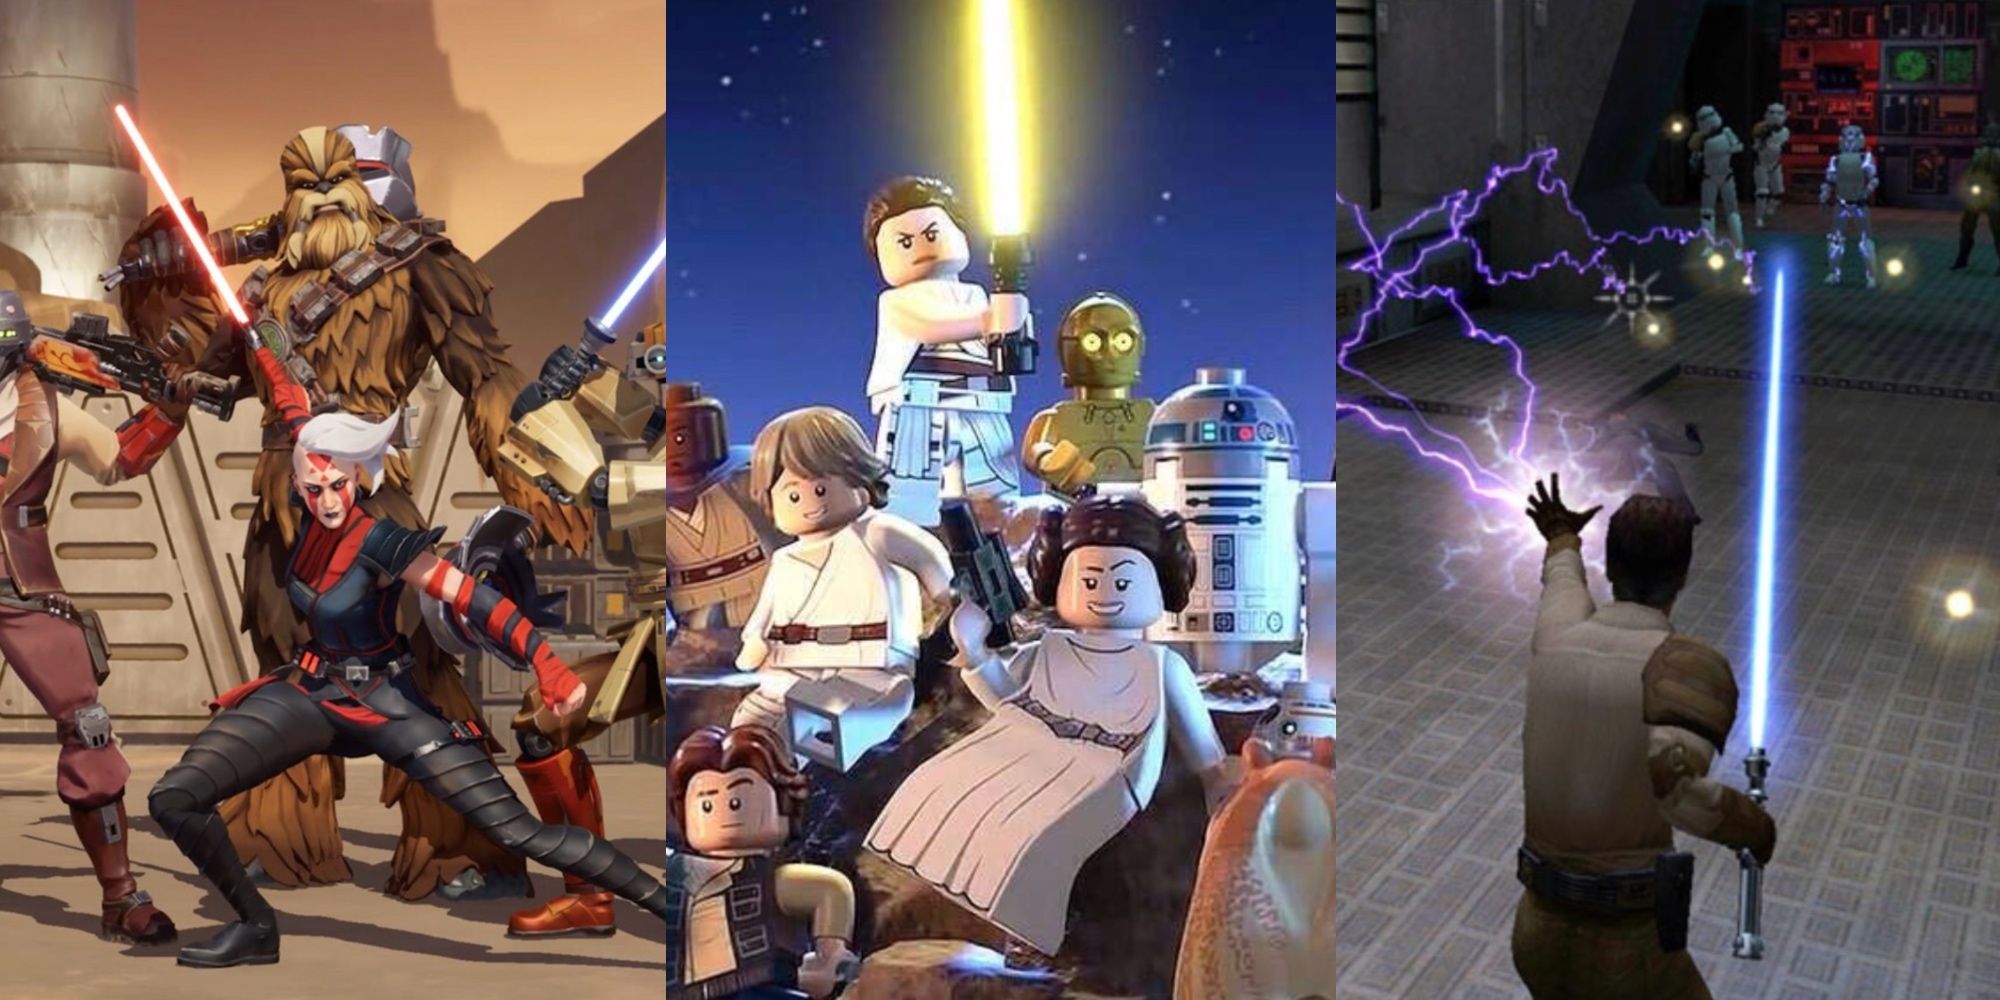 Several fighters pose together in Star Wars: Hunters. The Lego versions of the original cast crowd around for a photo. Kyle Katarn uses Force Lightning on some Stormtroopers.